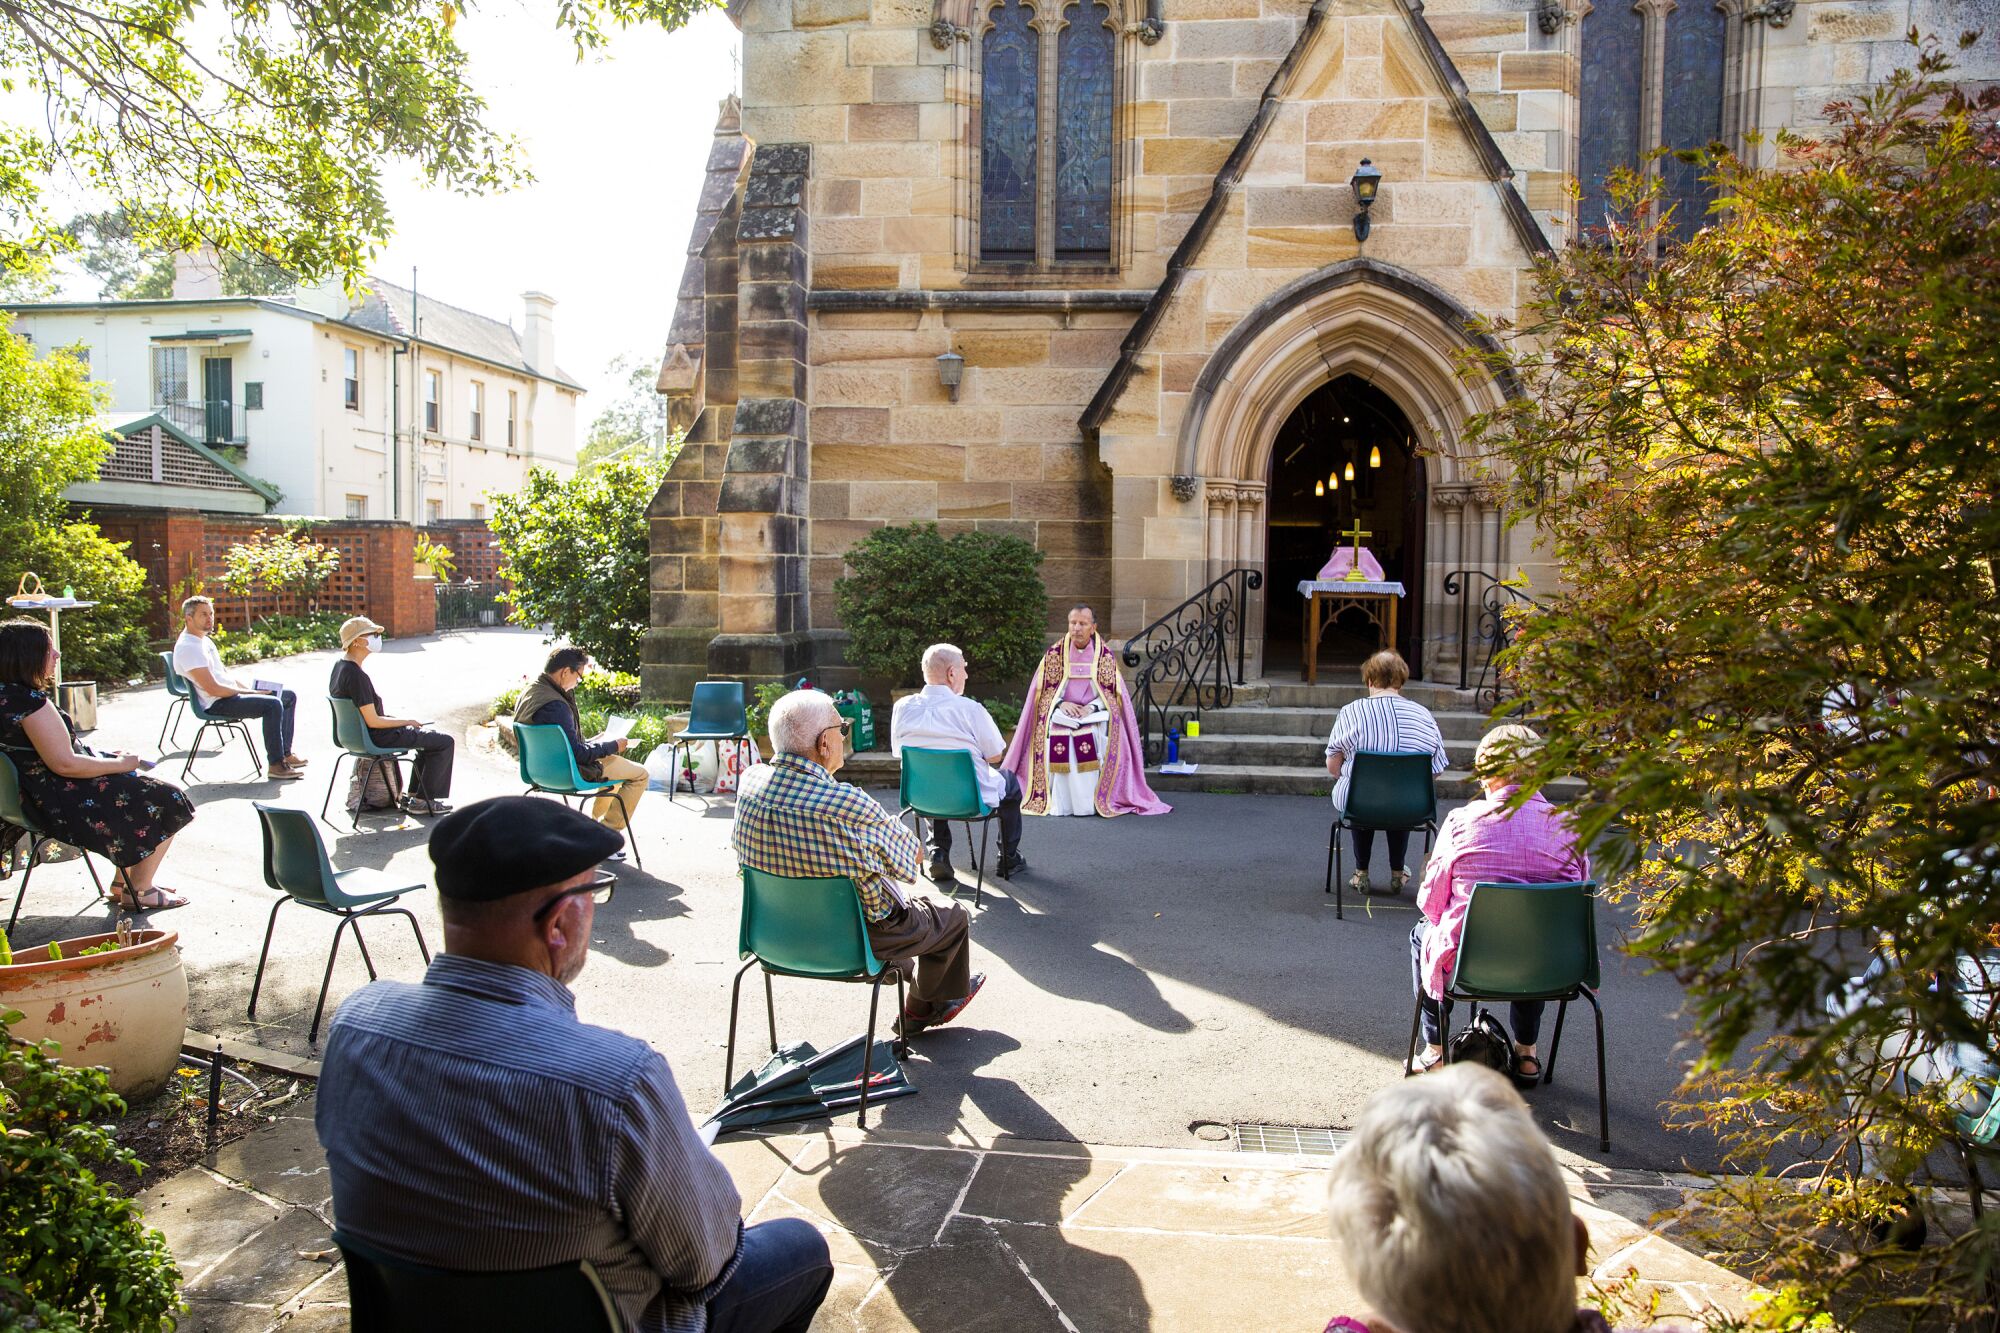 AUSTRALIA: Father James Collins holds a service in the yard of St. Paul's Anglican Church in Burwood with seating observant of social distancing in Sydney, Australia. Churches across Sydney have opted to suspend services or hold them outdoors in response to the pandemic.